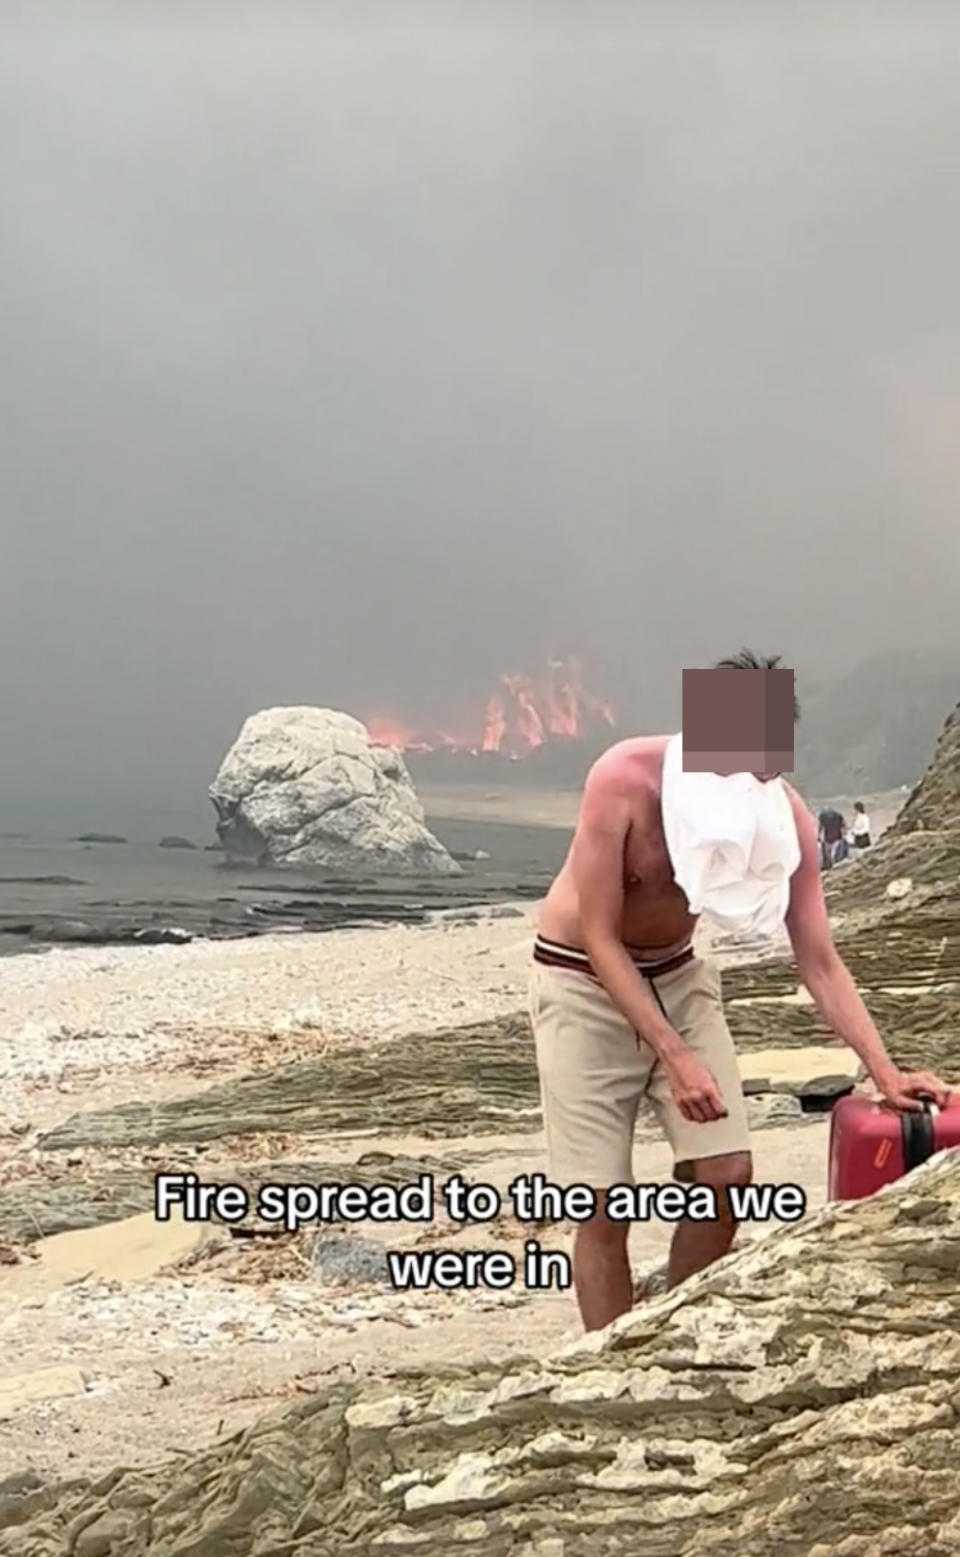 "Fire spread to the area we were in"